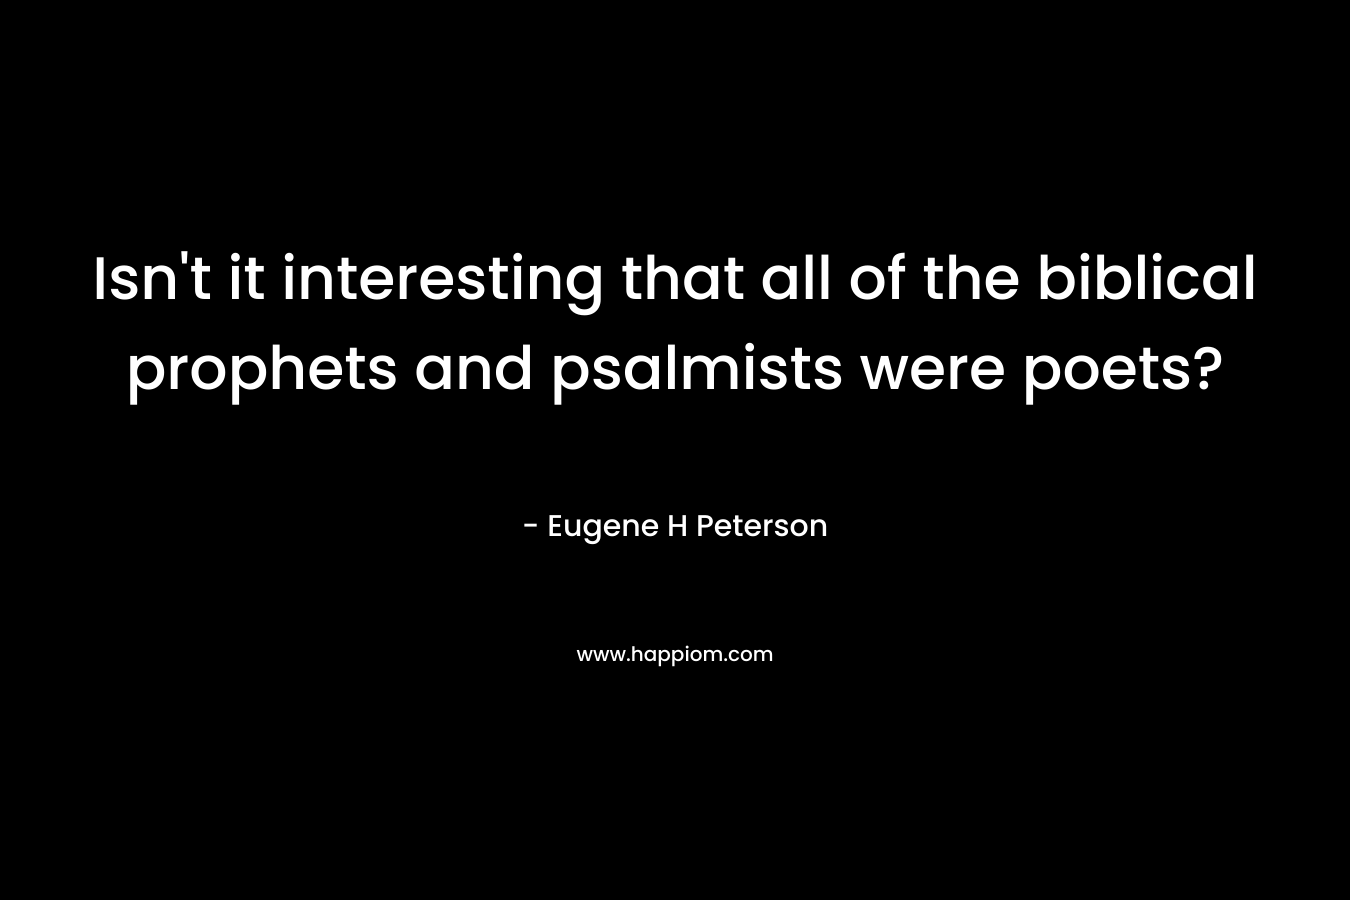 Isn’t it interesting that all of the biblical prophets and psalmists were poets? – Eugene H Peterson